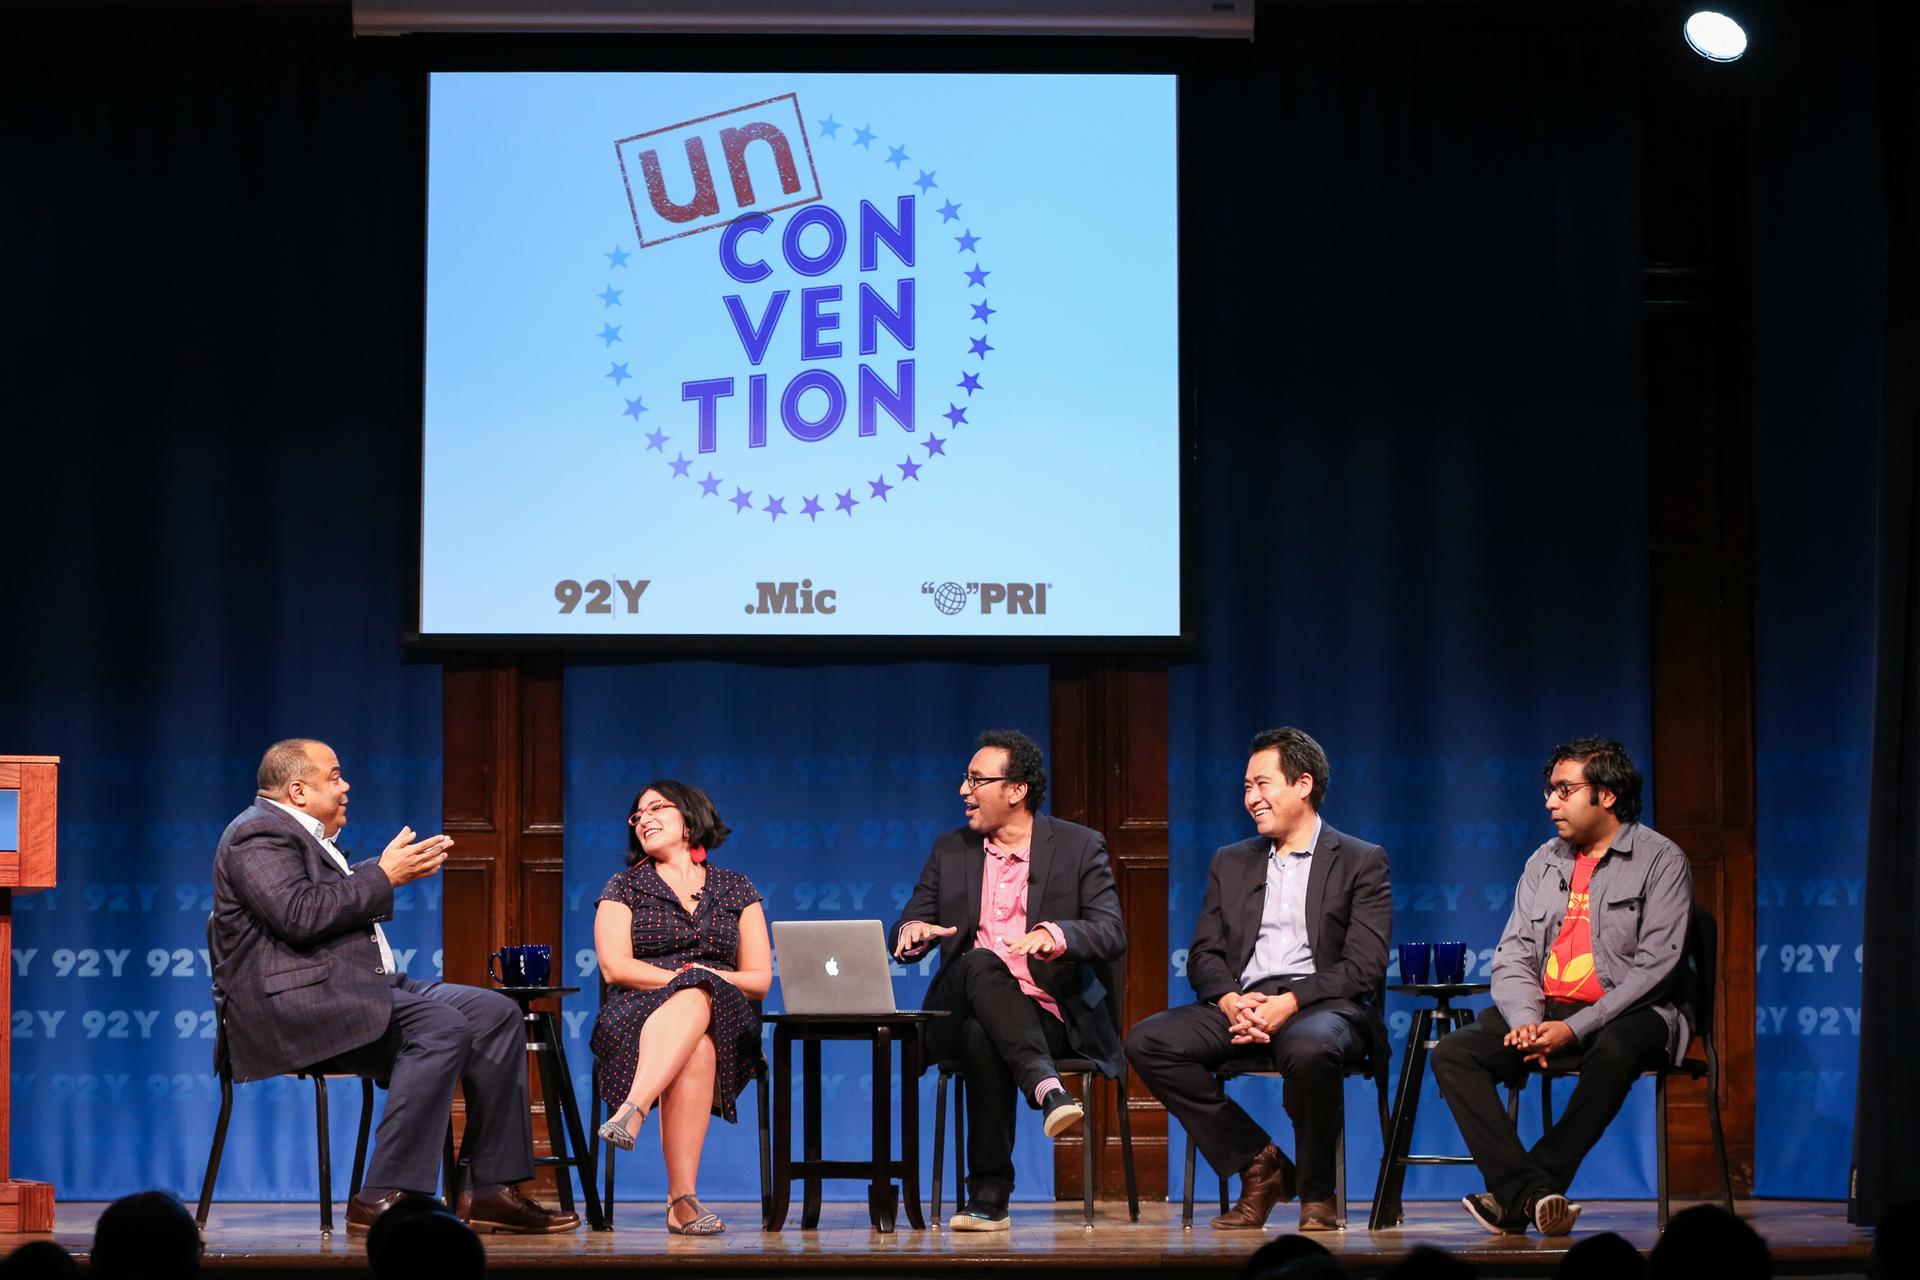 Actor Aasif Mandvi and others speak about divesristy at UnConvention panel in NYC 